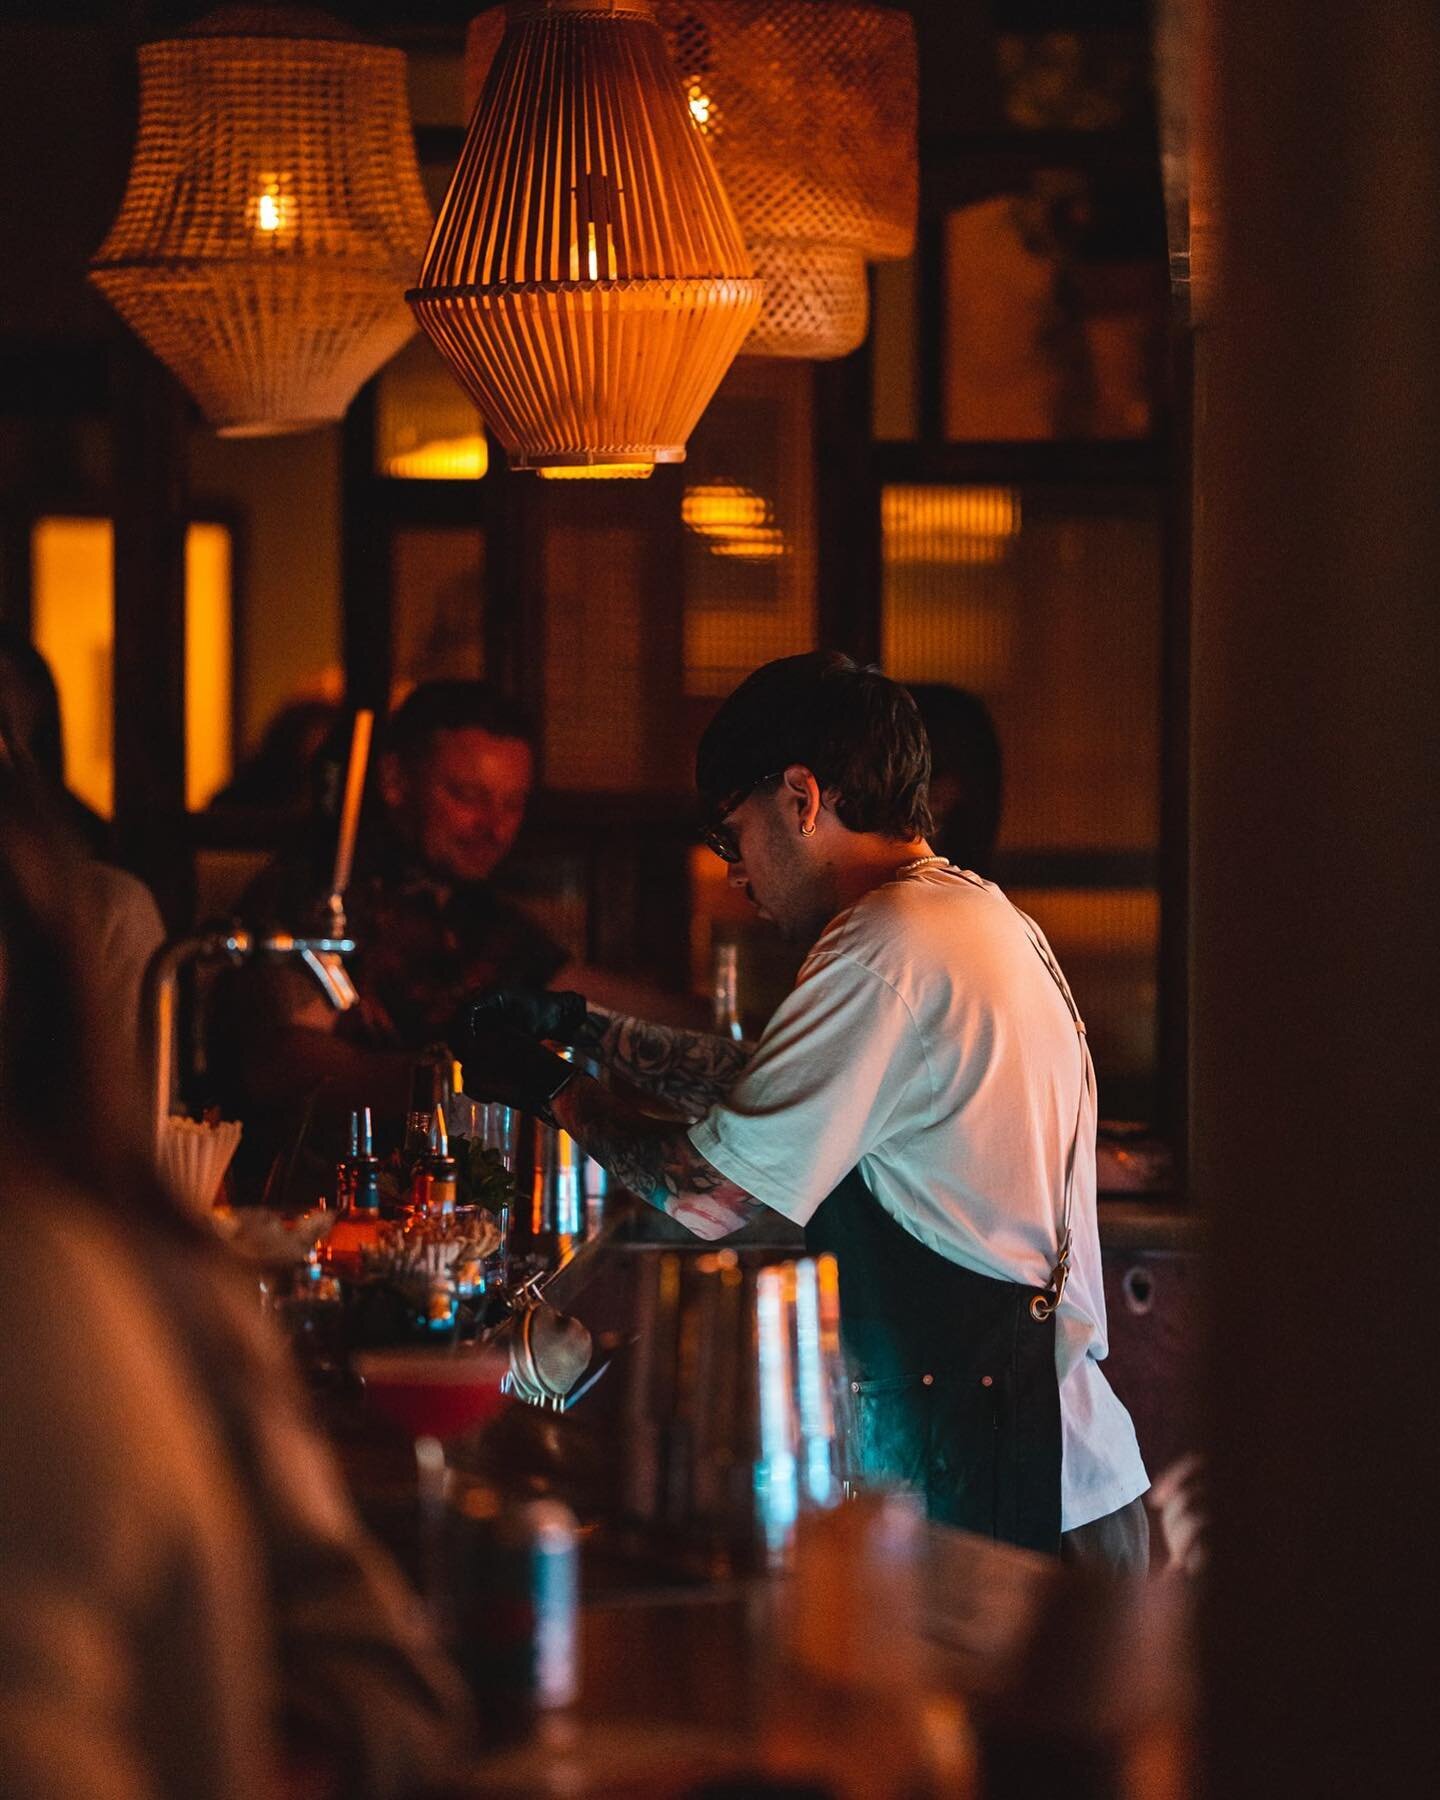 One day you&rsquo;ll meet the guy of your dreams at Nine Lives Bar and look back on how you fell in love over the sweet, sweet sounds of Lip Service&hellip;. #newmenu 

MARGARITA HOUR Every. Single. Day. until 6pm

Book your spot babe, #linkinbio

#L